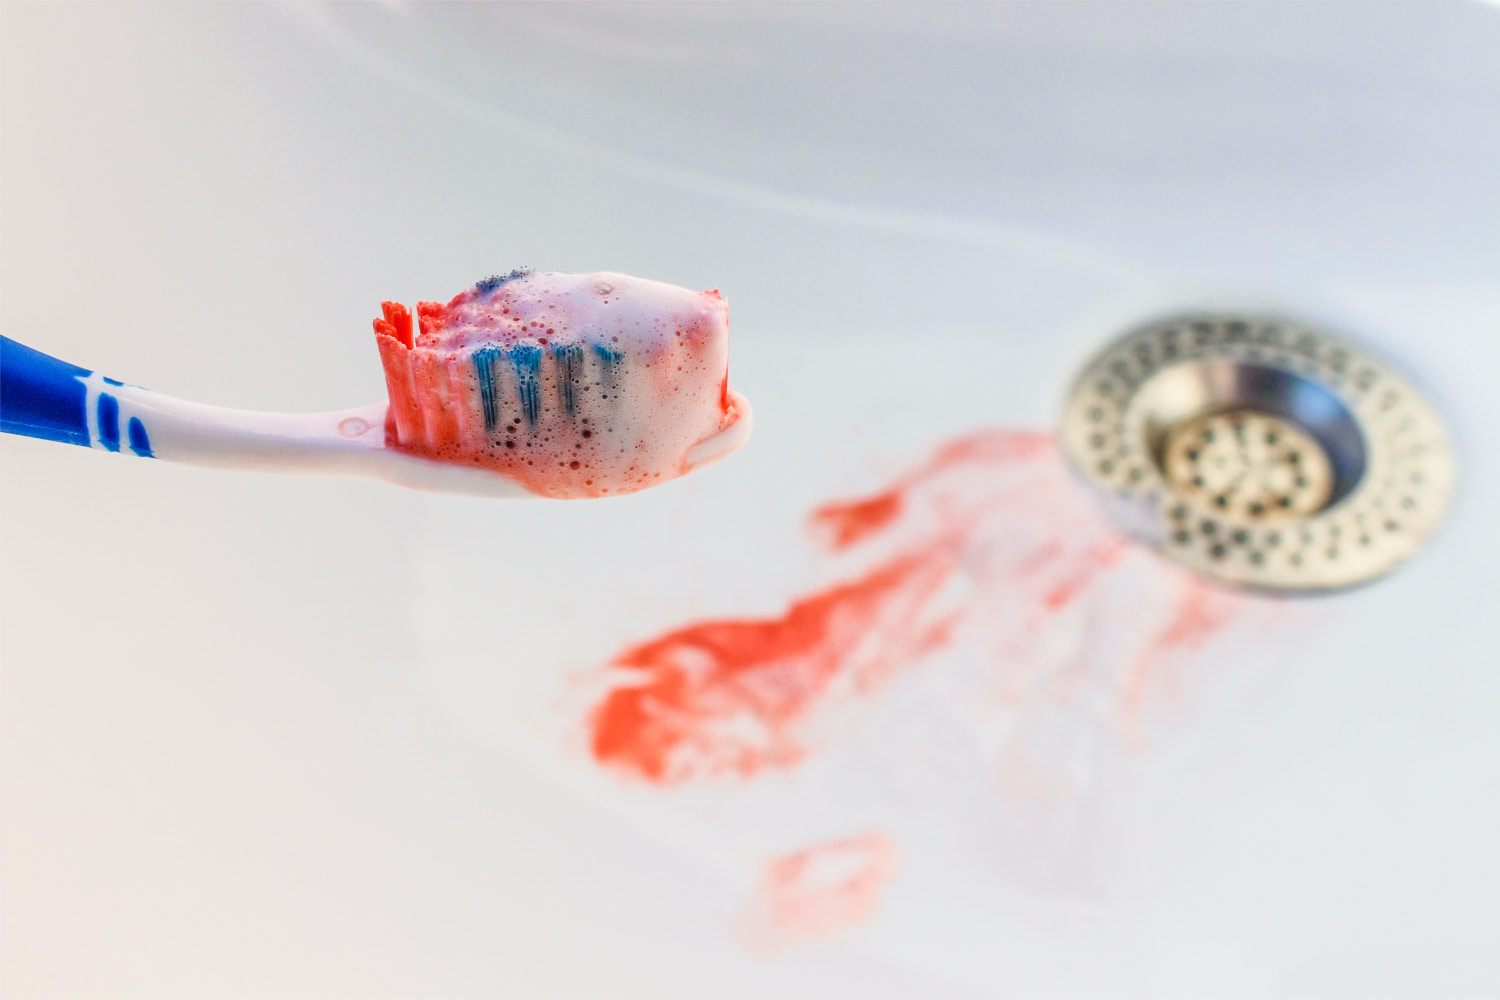 Closeup of a toothbrush with blood on it and blood in the sink from gum disease